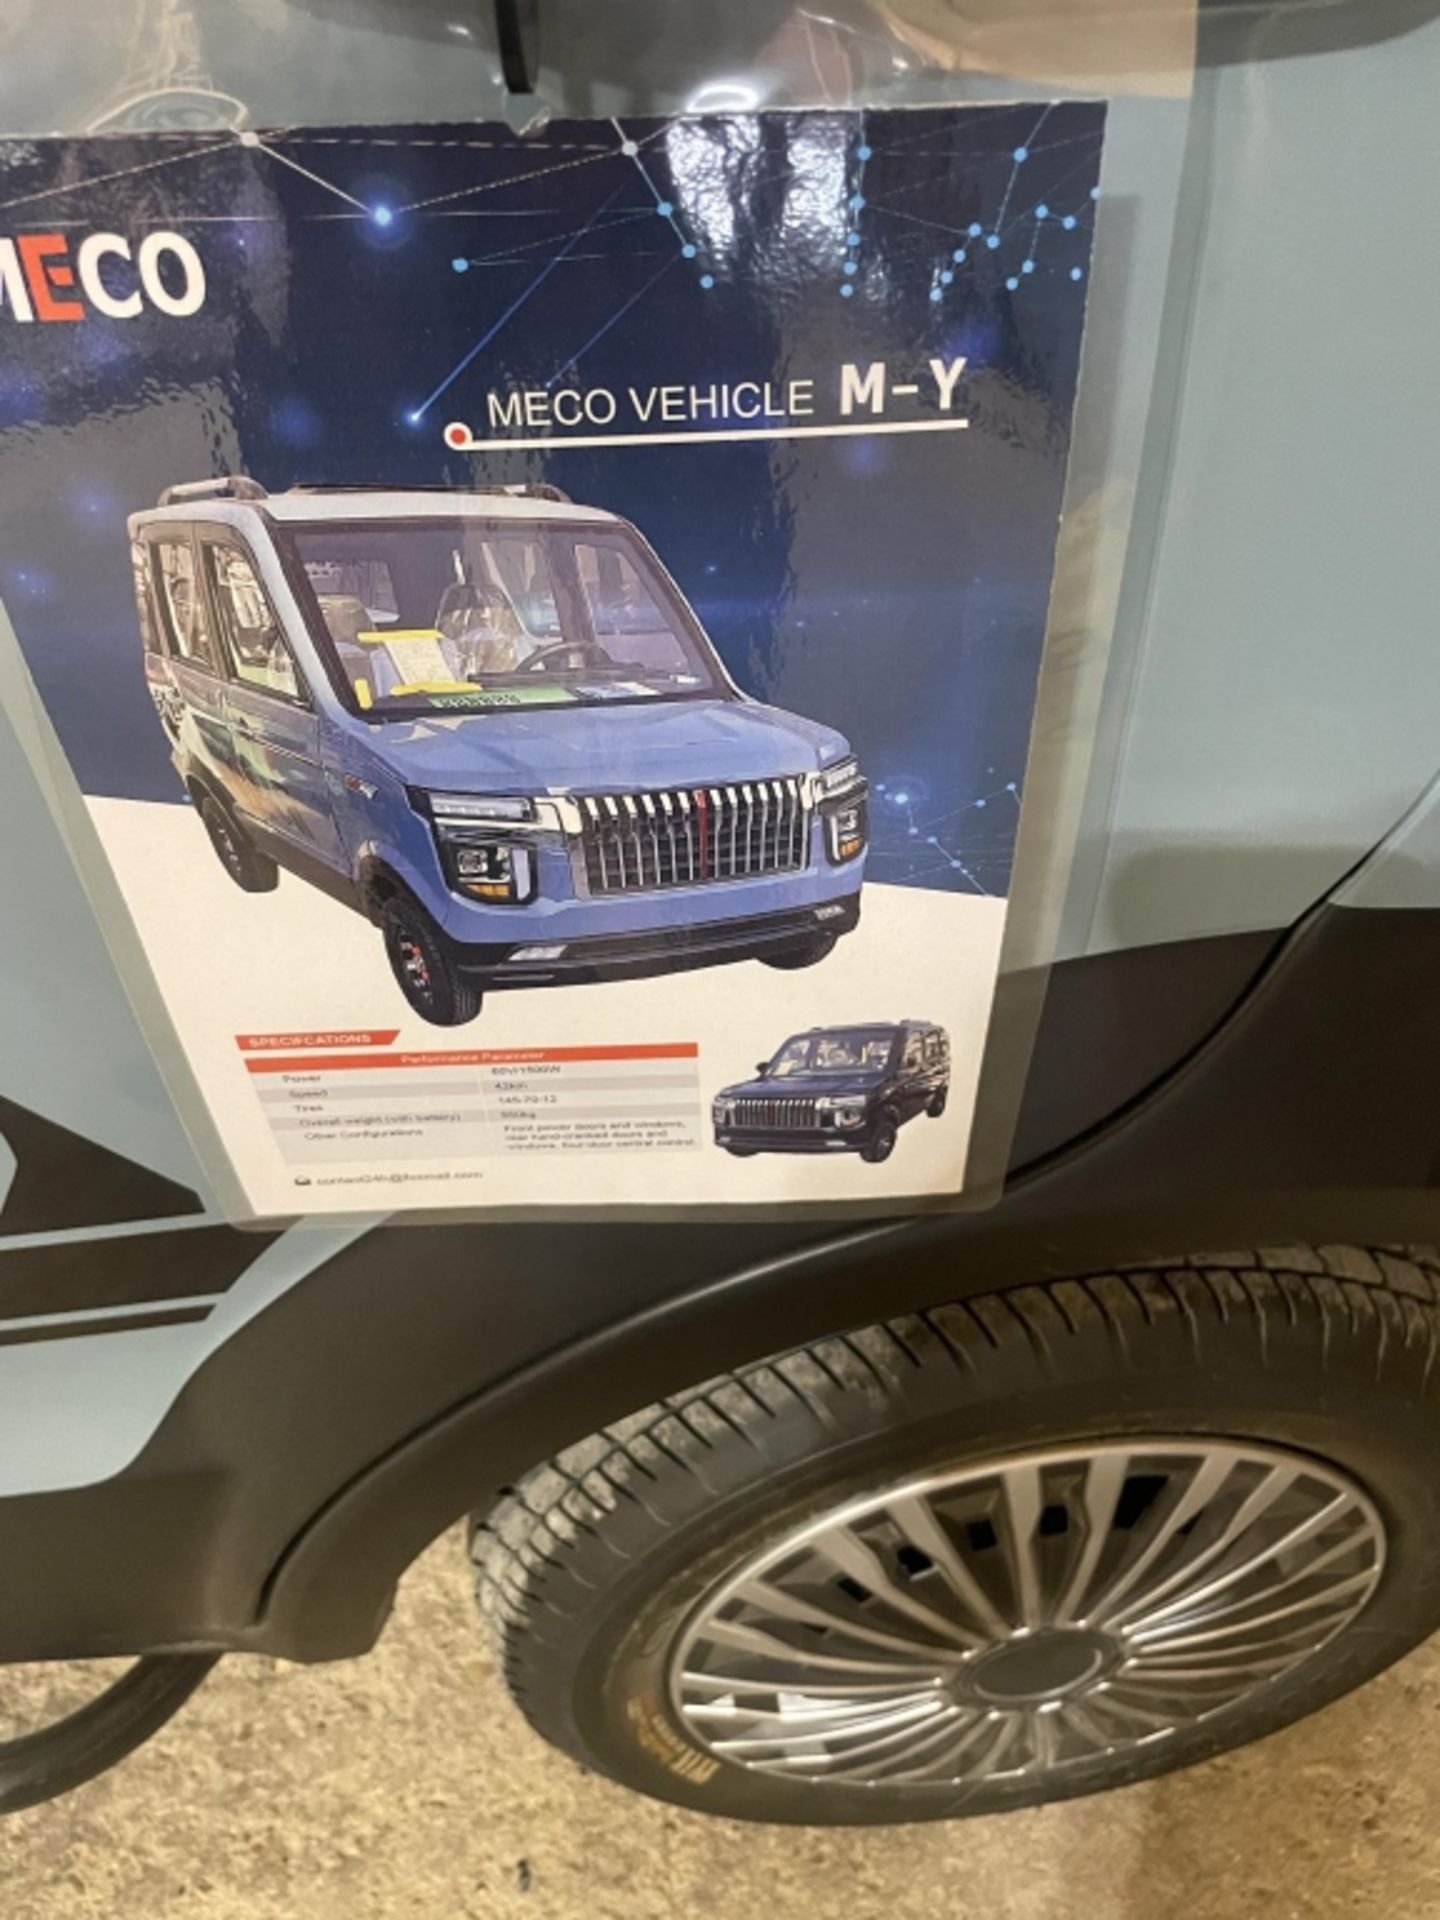 MECO M-Y Electric Vehicle - Image 10 of 10